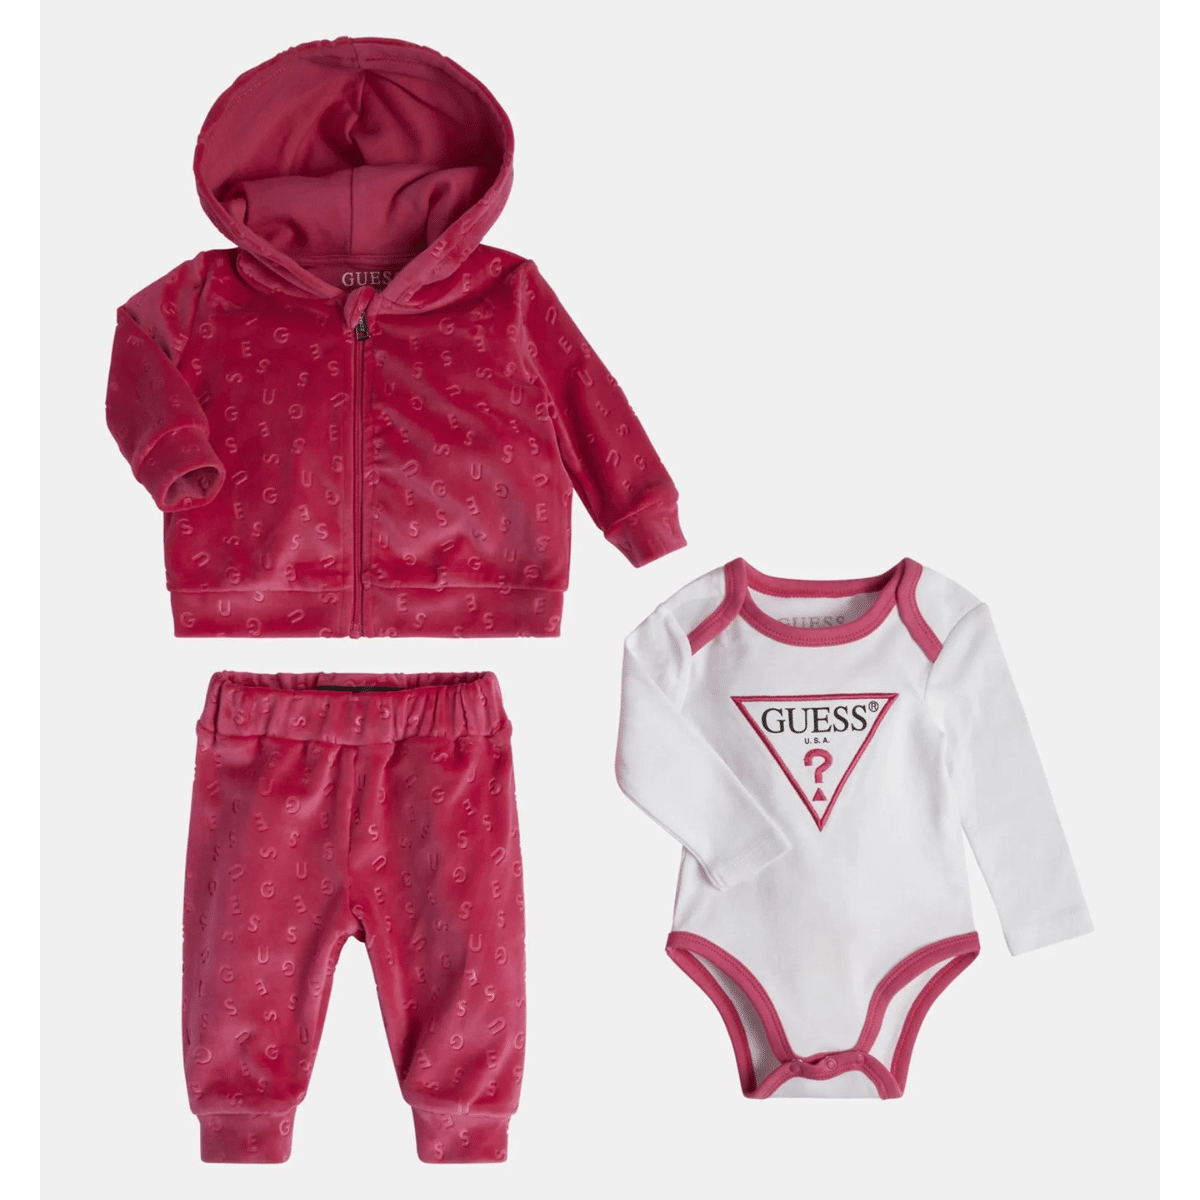 Guess baby girl red outfit set